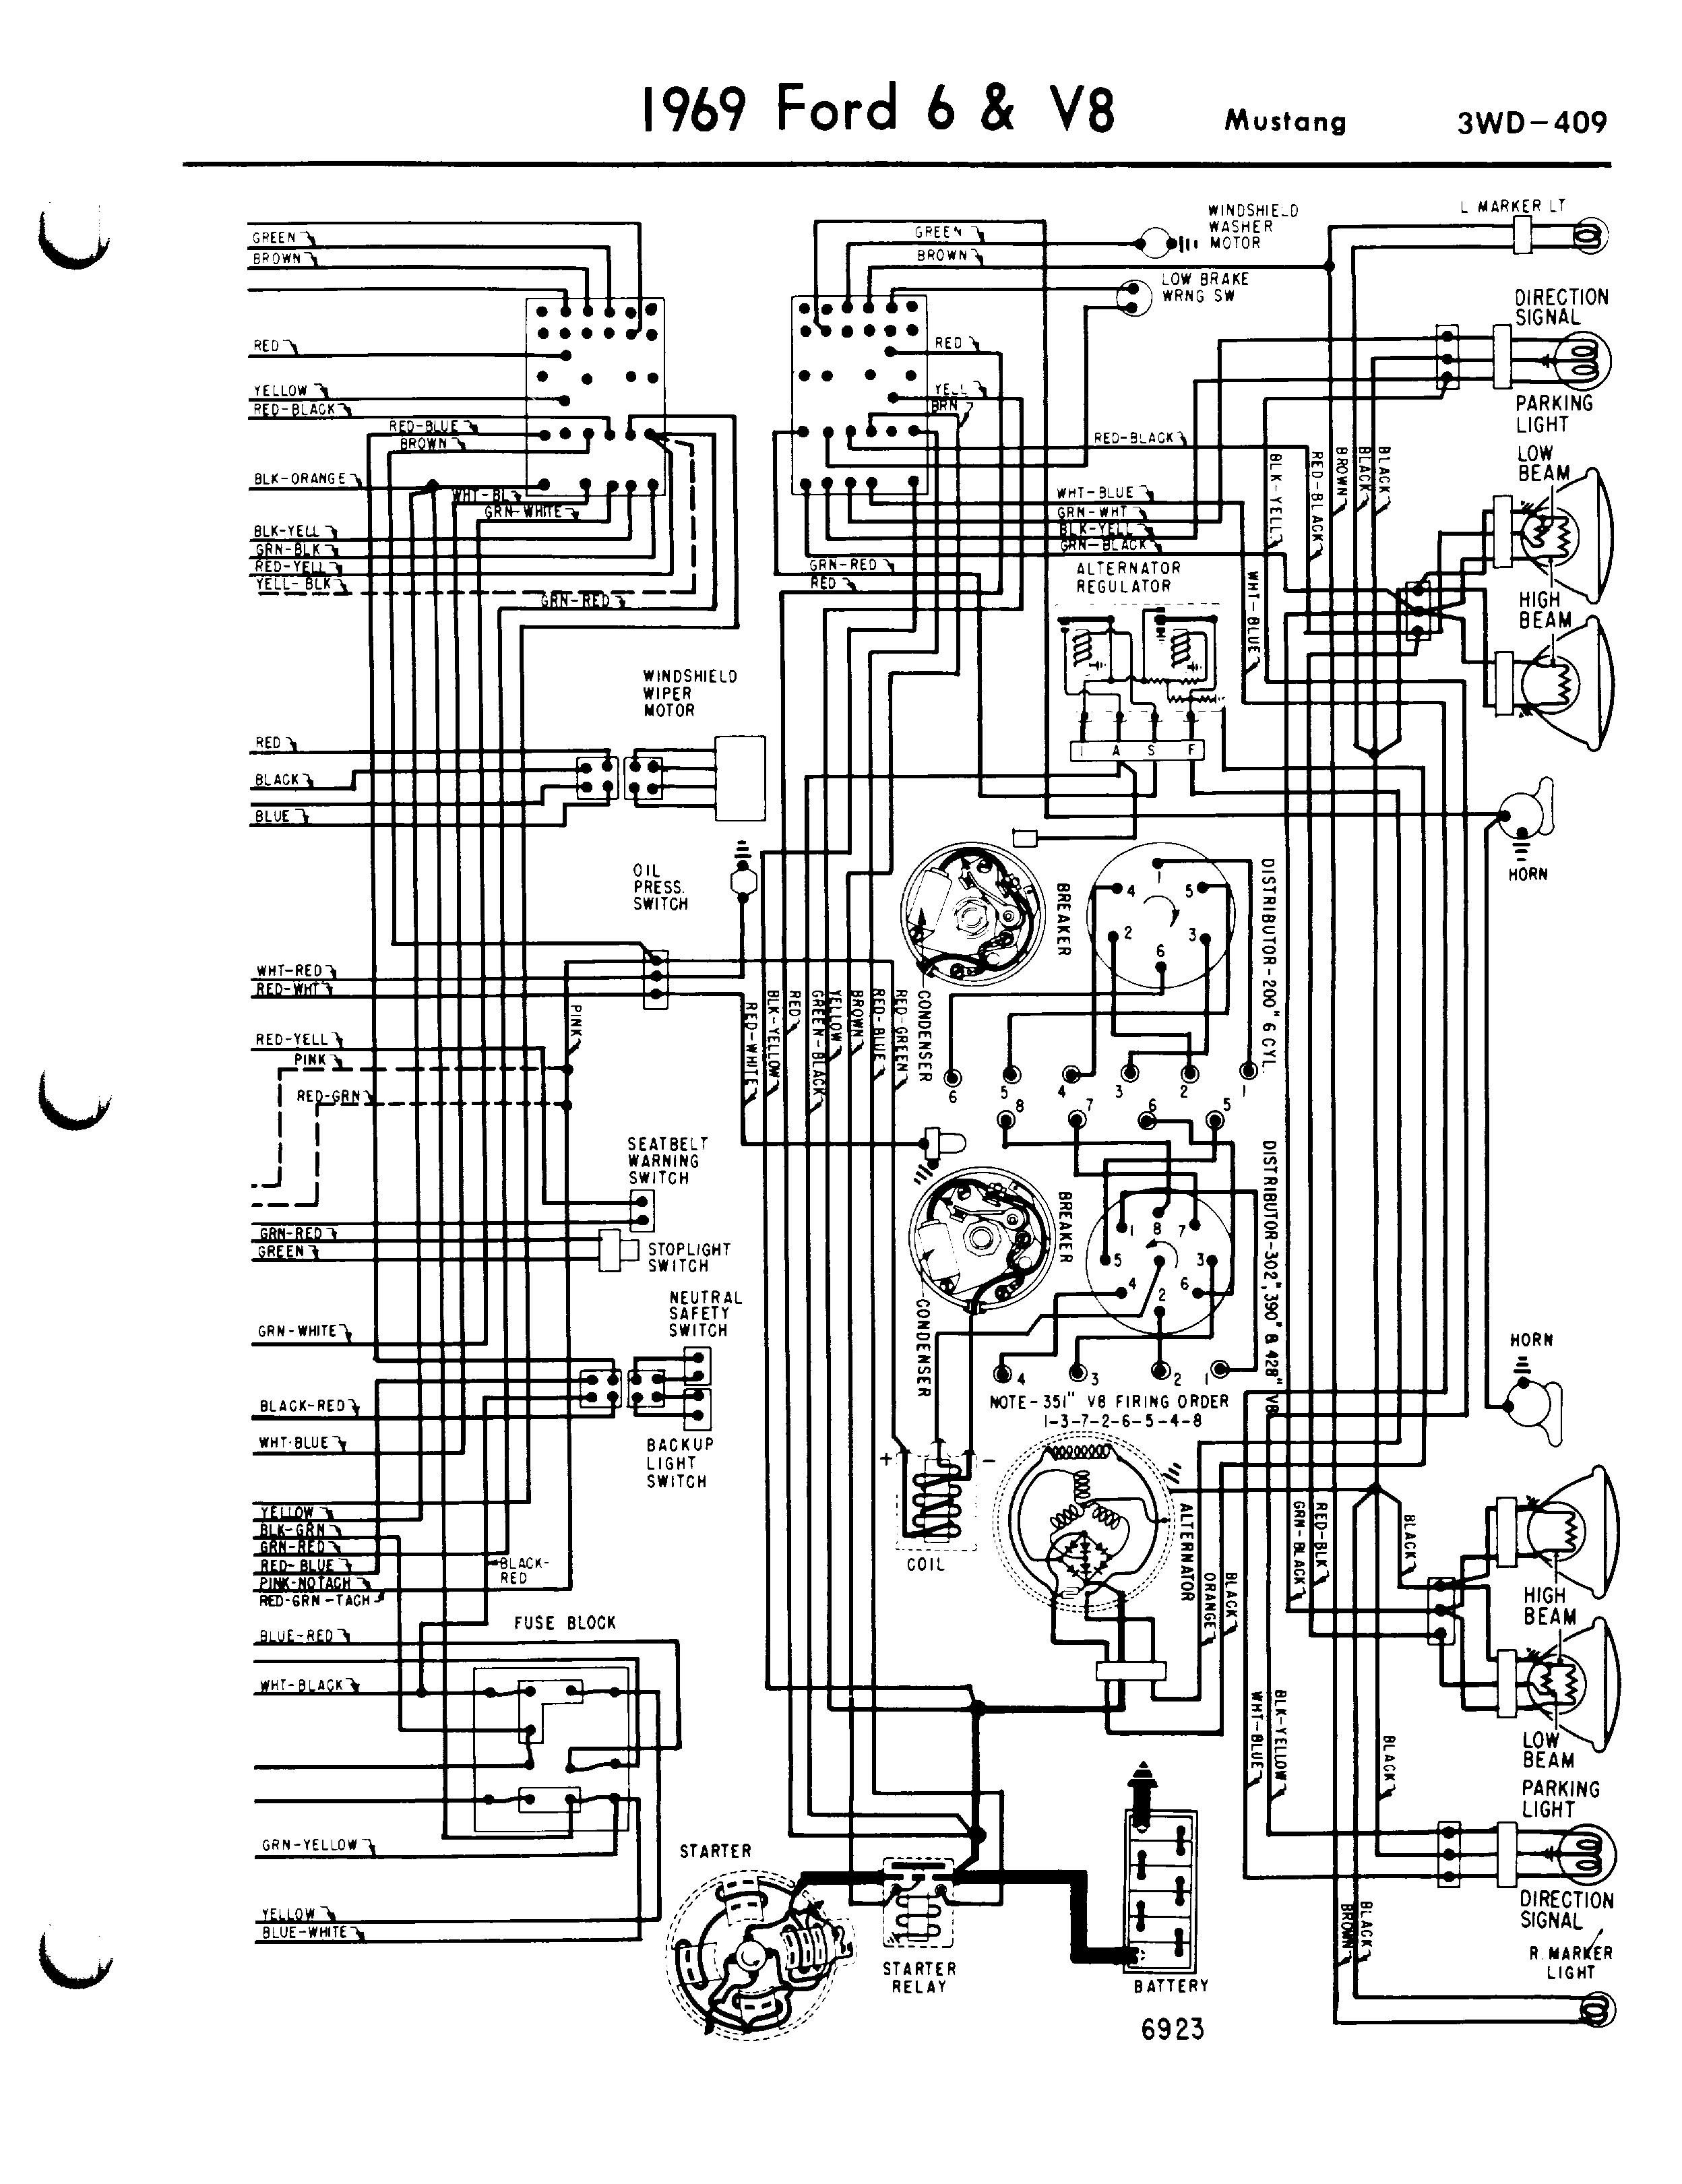 wiring diagram for 69f250